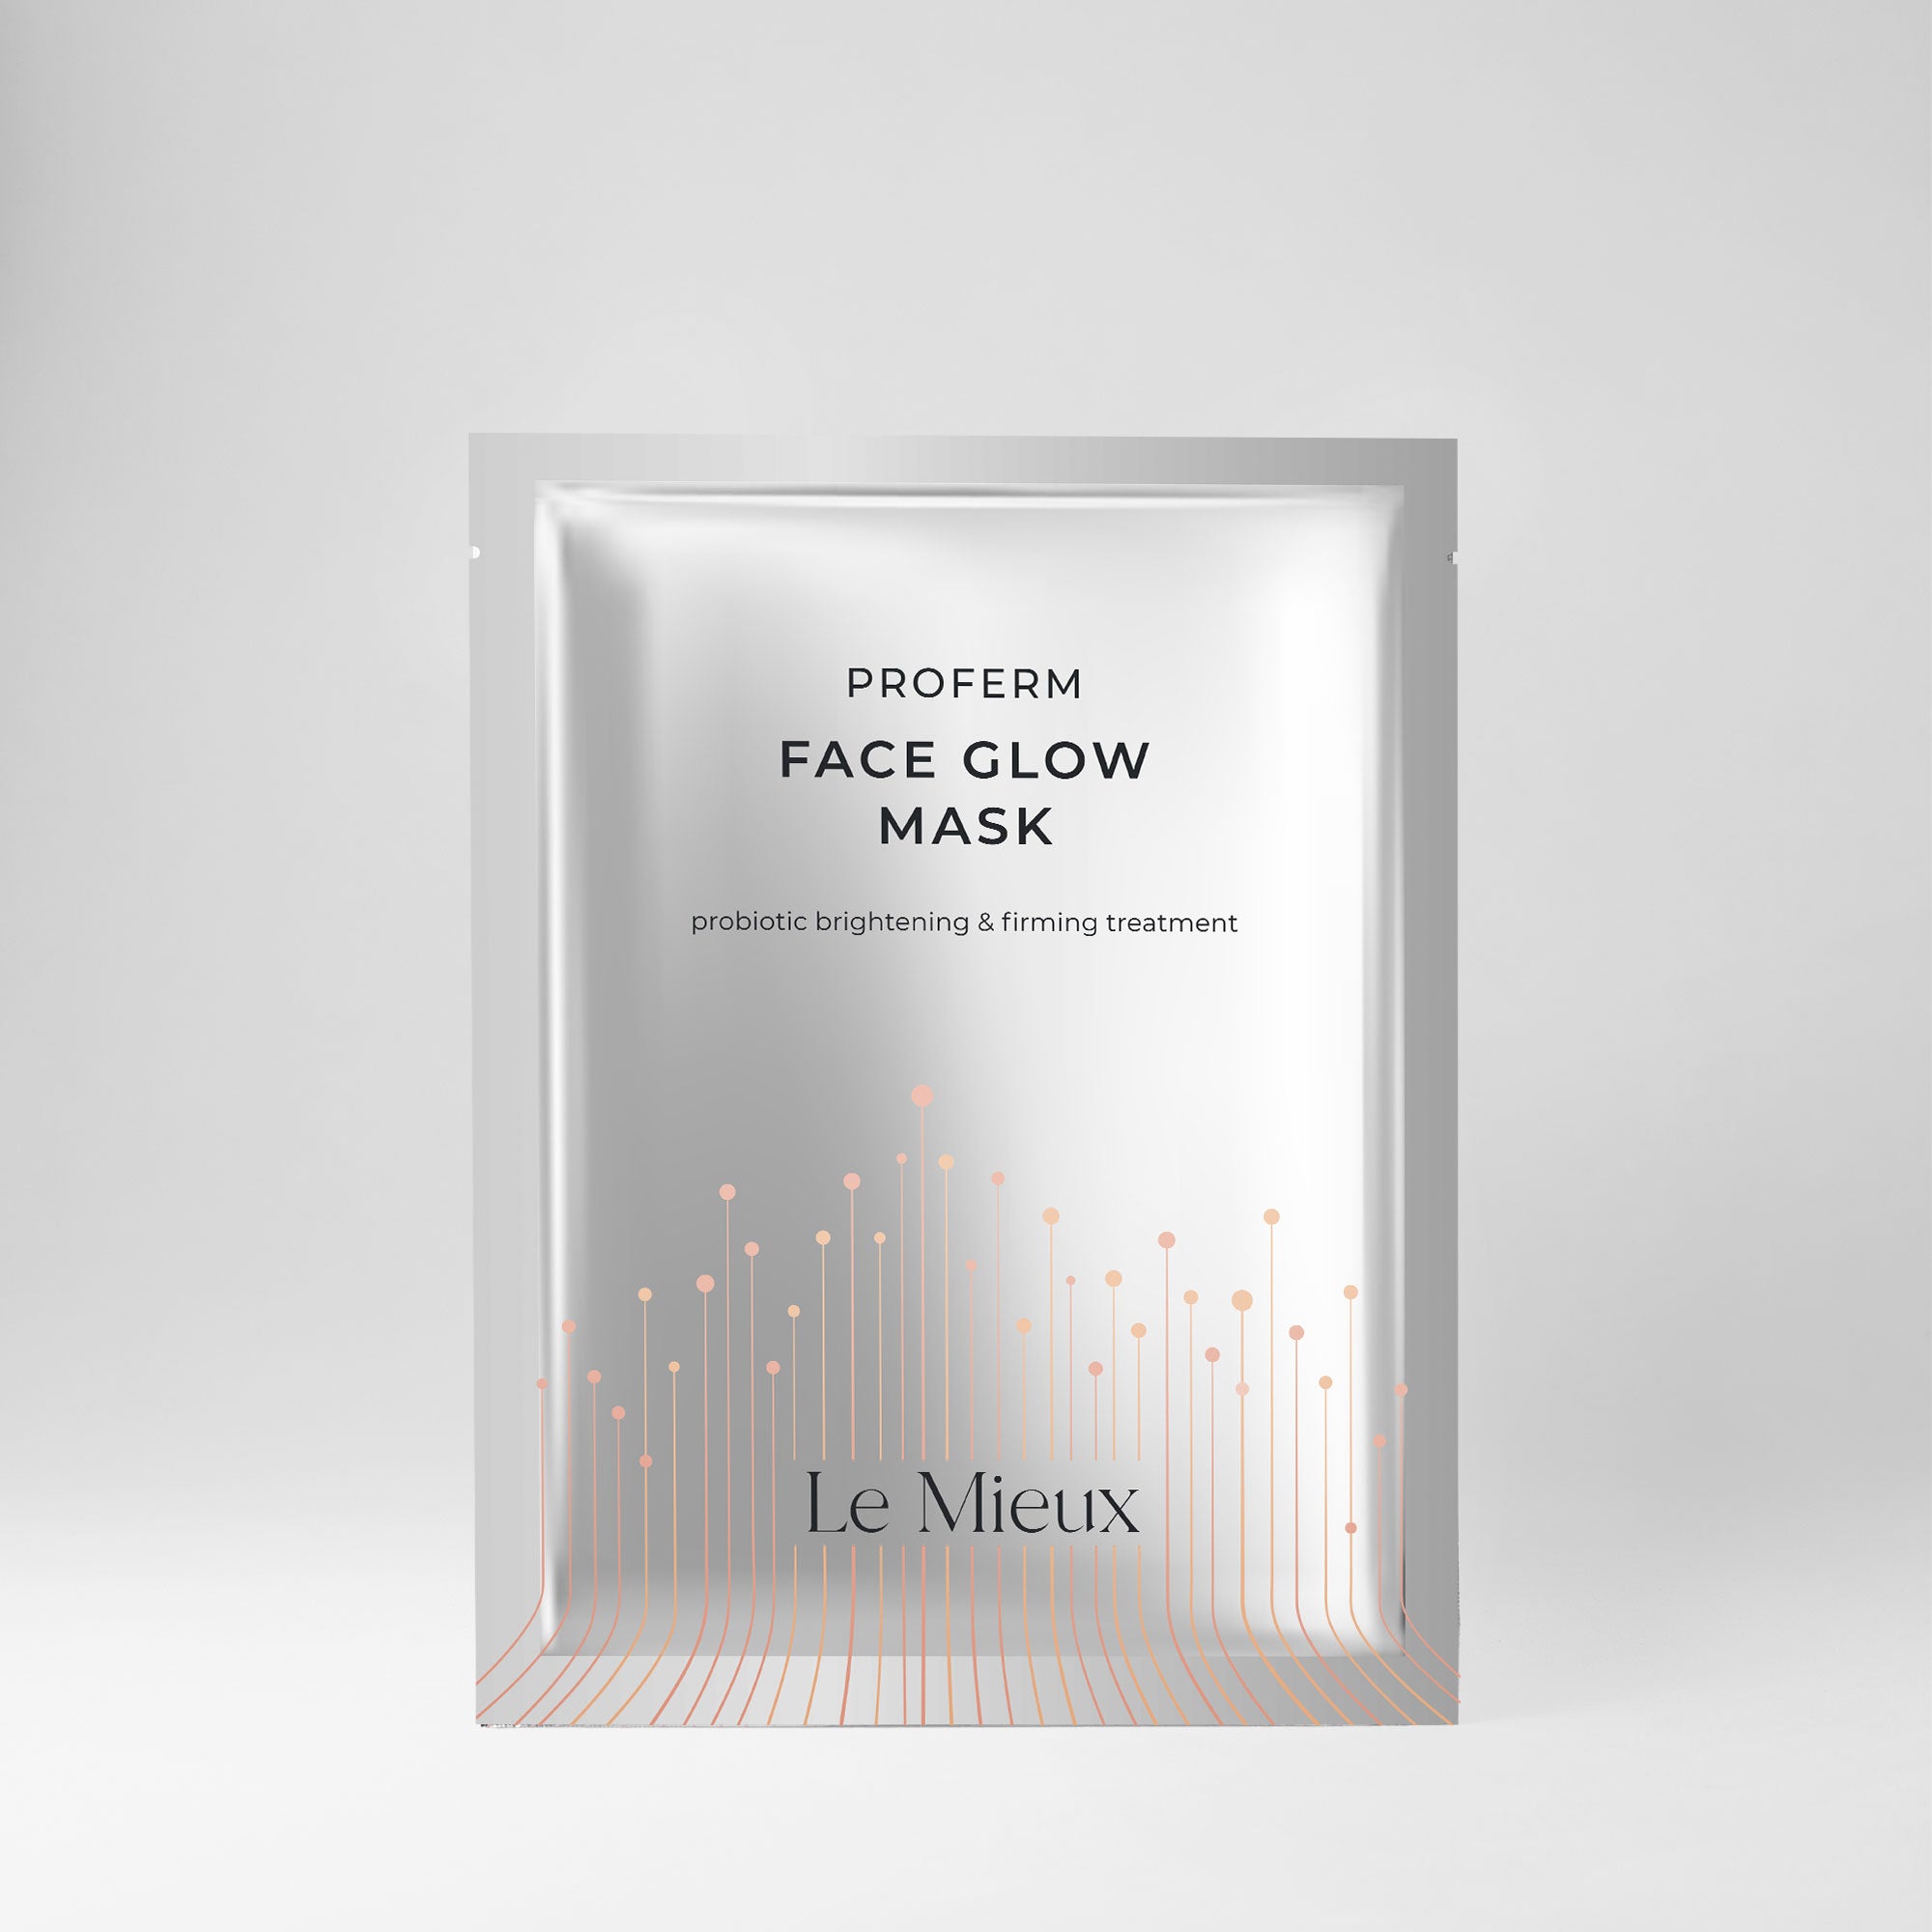  ProFerm Face Glow Mask from Le Mieux Skincare - 1